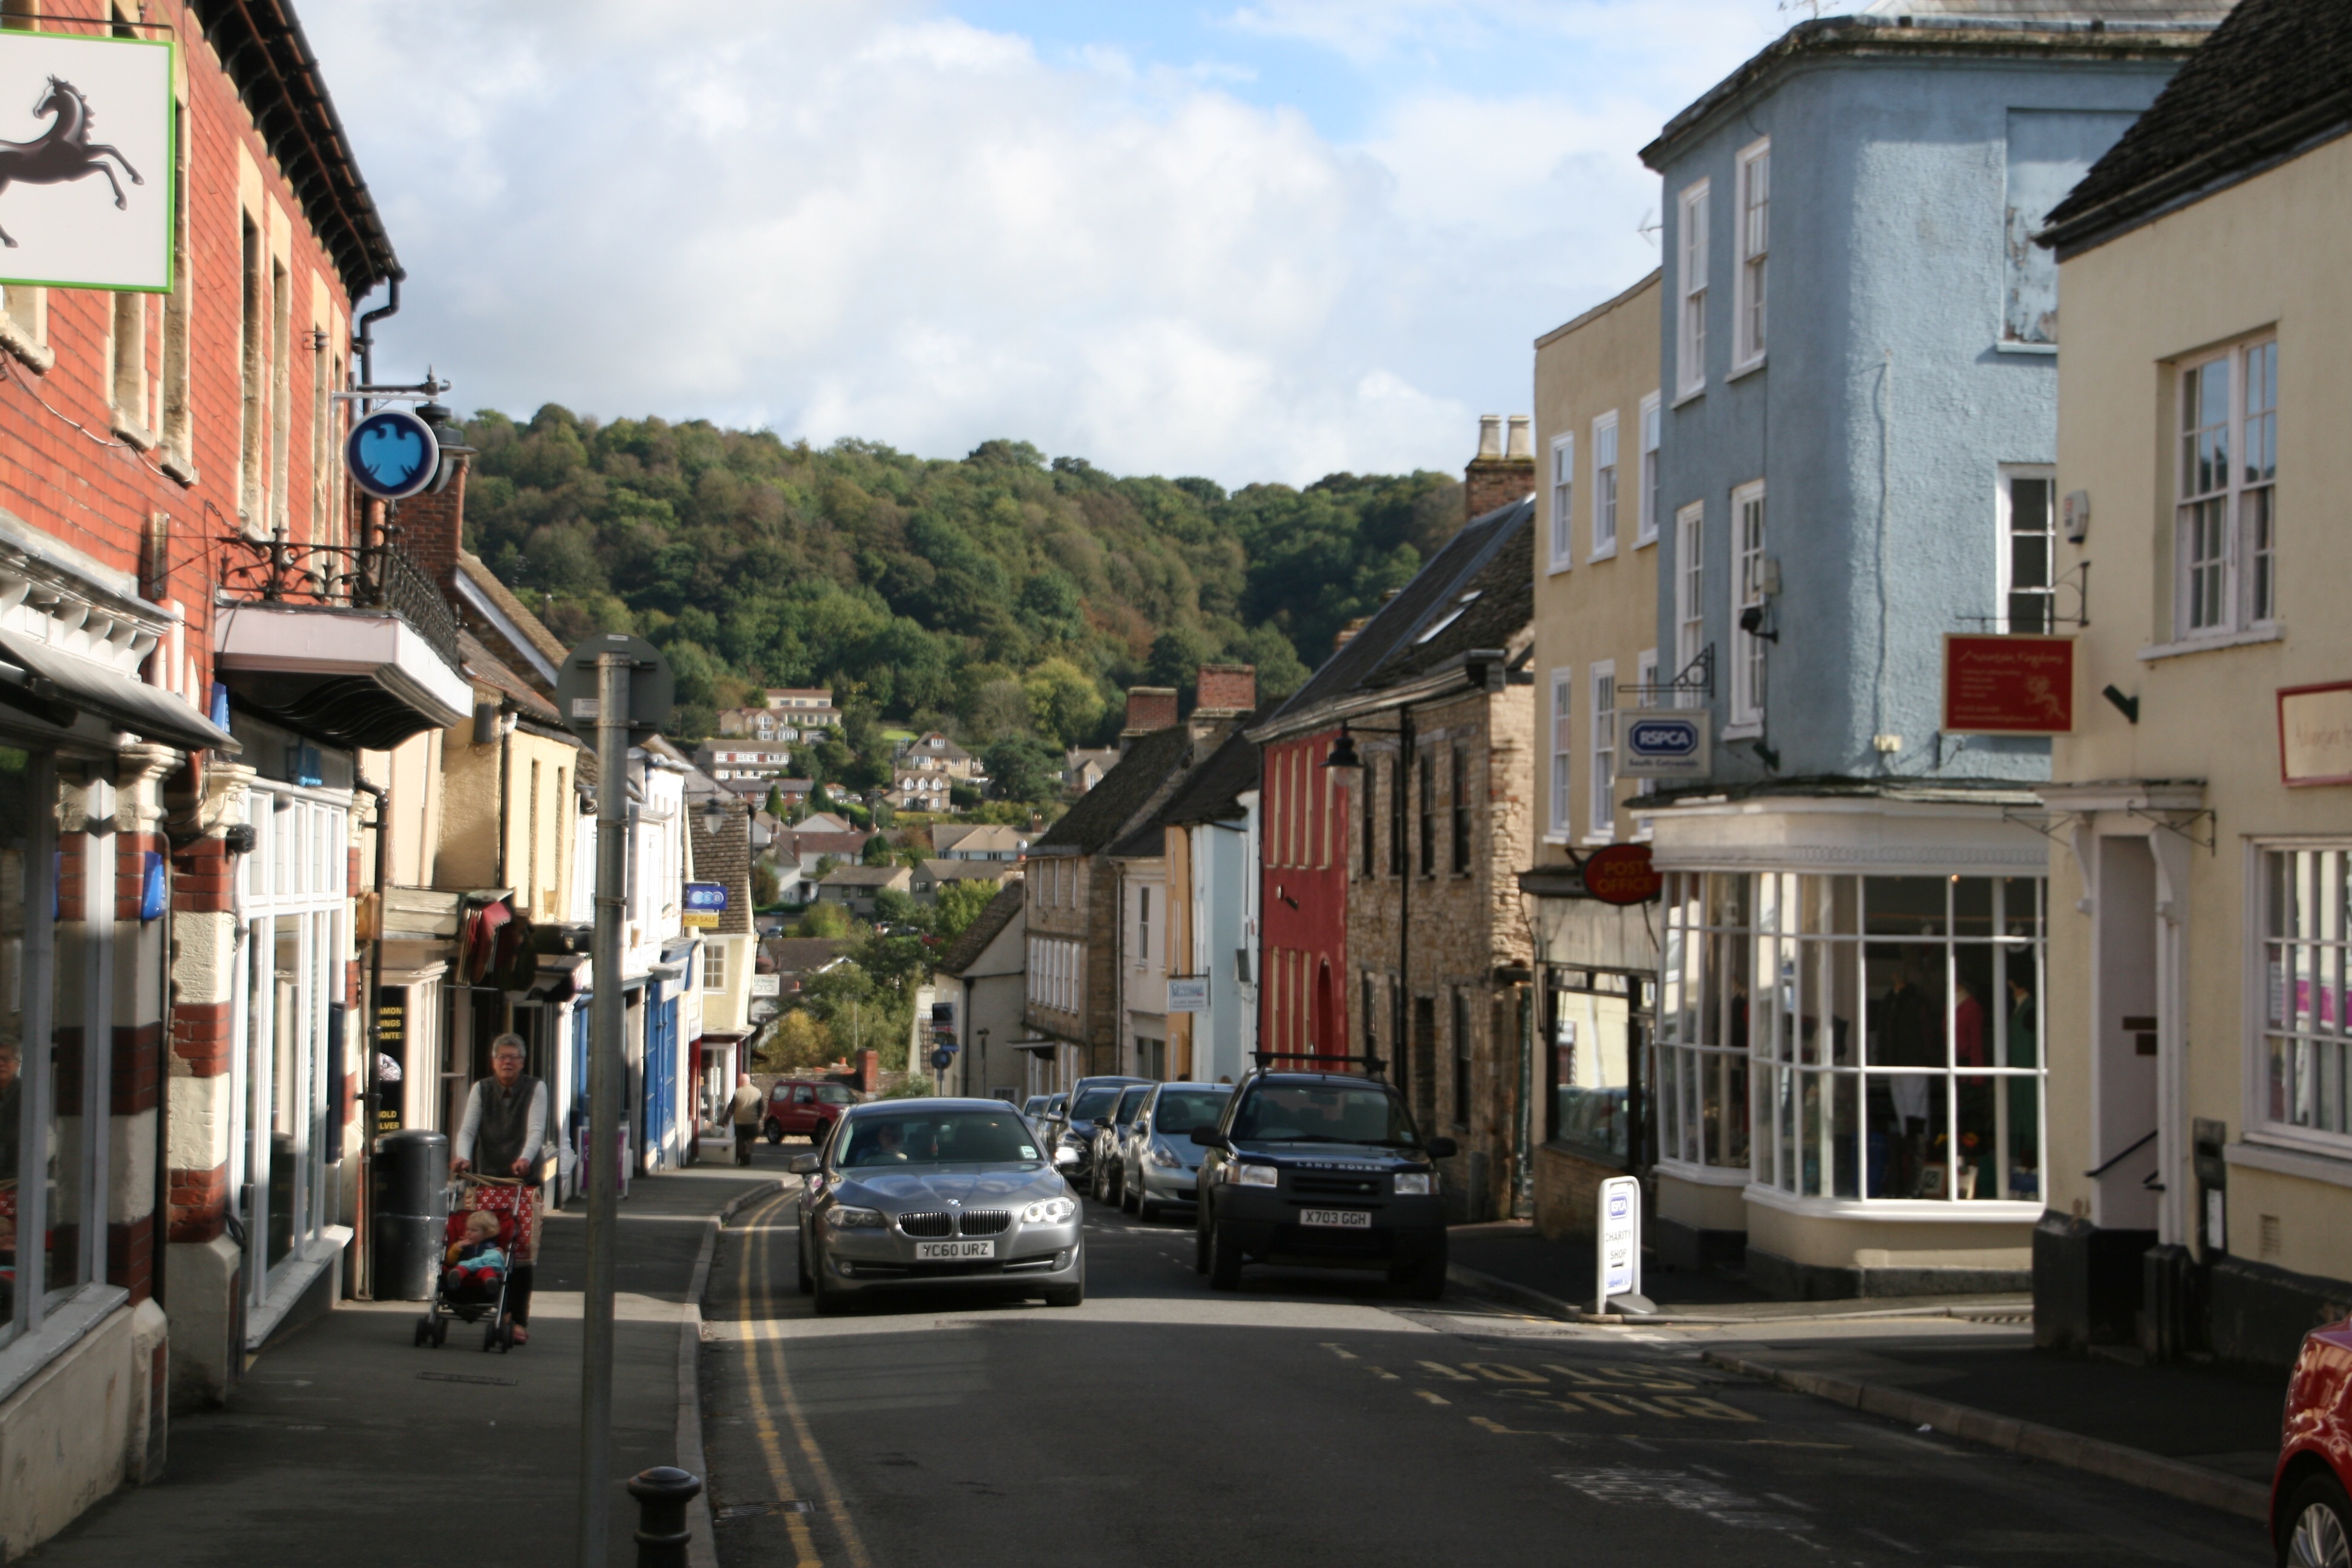 let's take a trip up to abergavenny